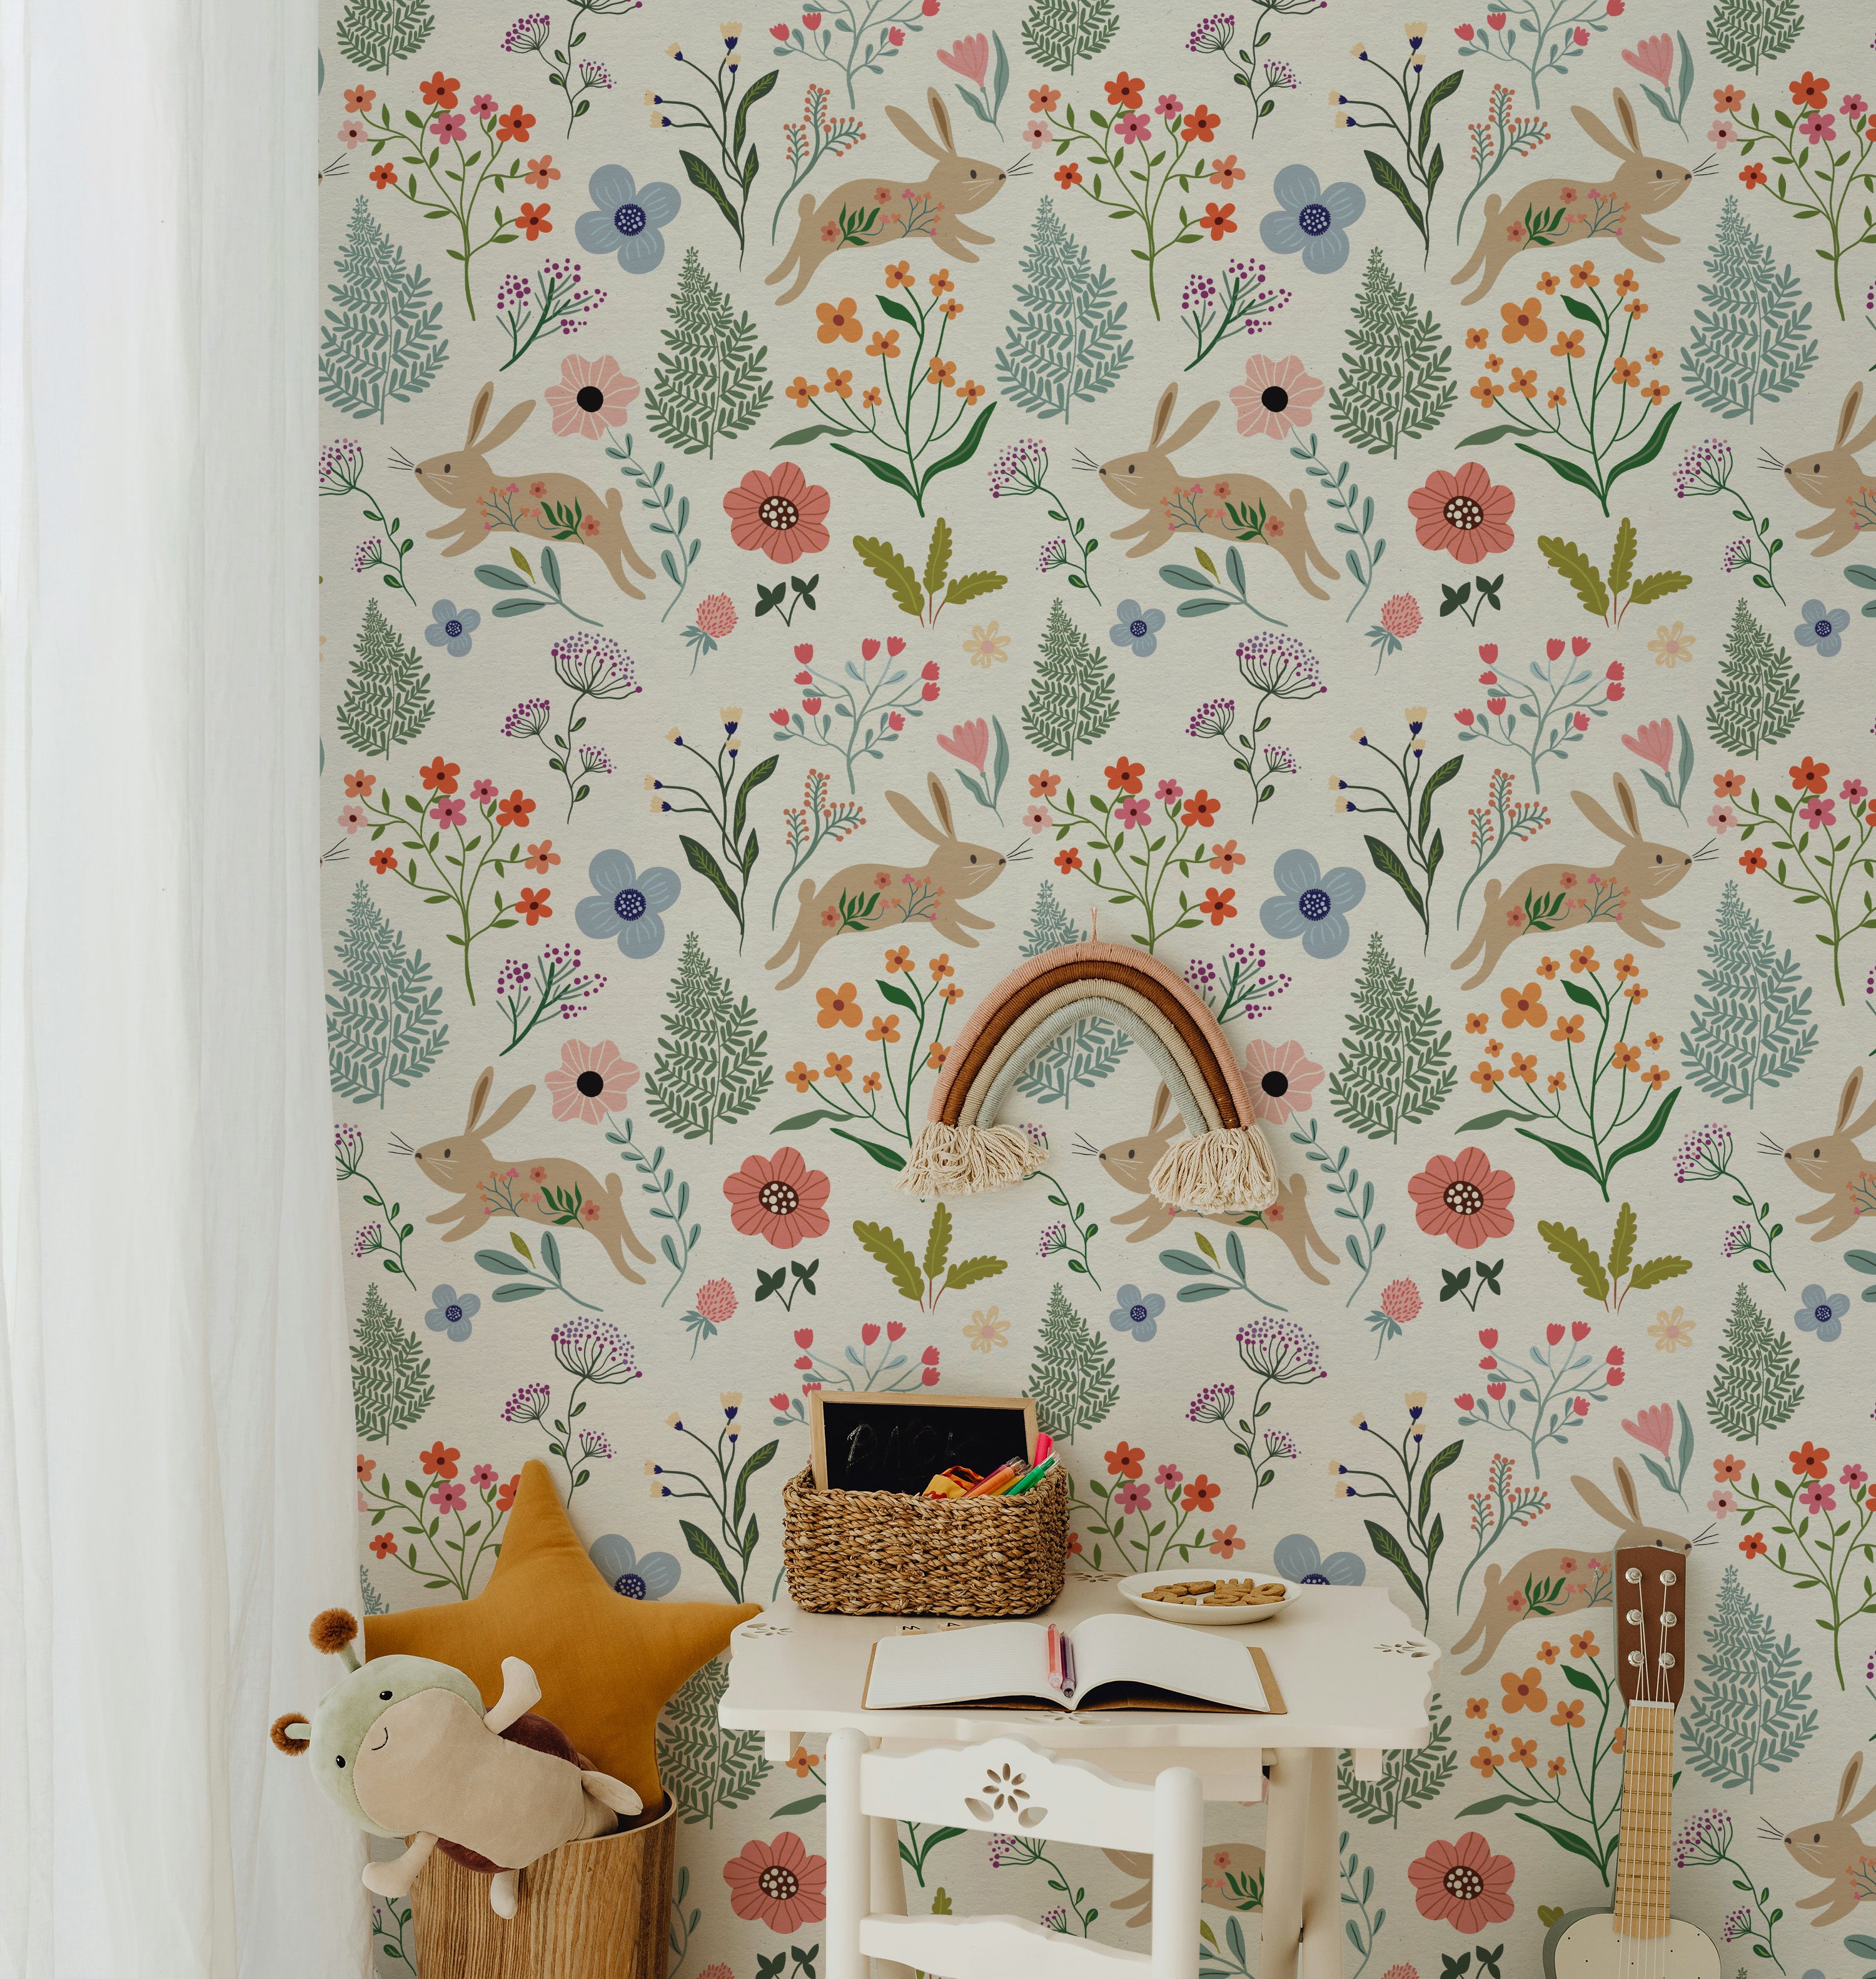 A cozy reading nook for children decorated with Colourful Spring Bunnies Wallpaper. The wallpaper's delightful pattern of rabbits and varied flowers creates a lively and engaging environment. A small white table holds books and toys, enhancing the playful theme.